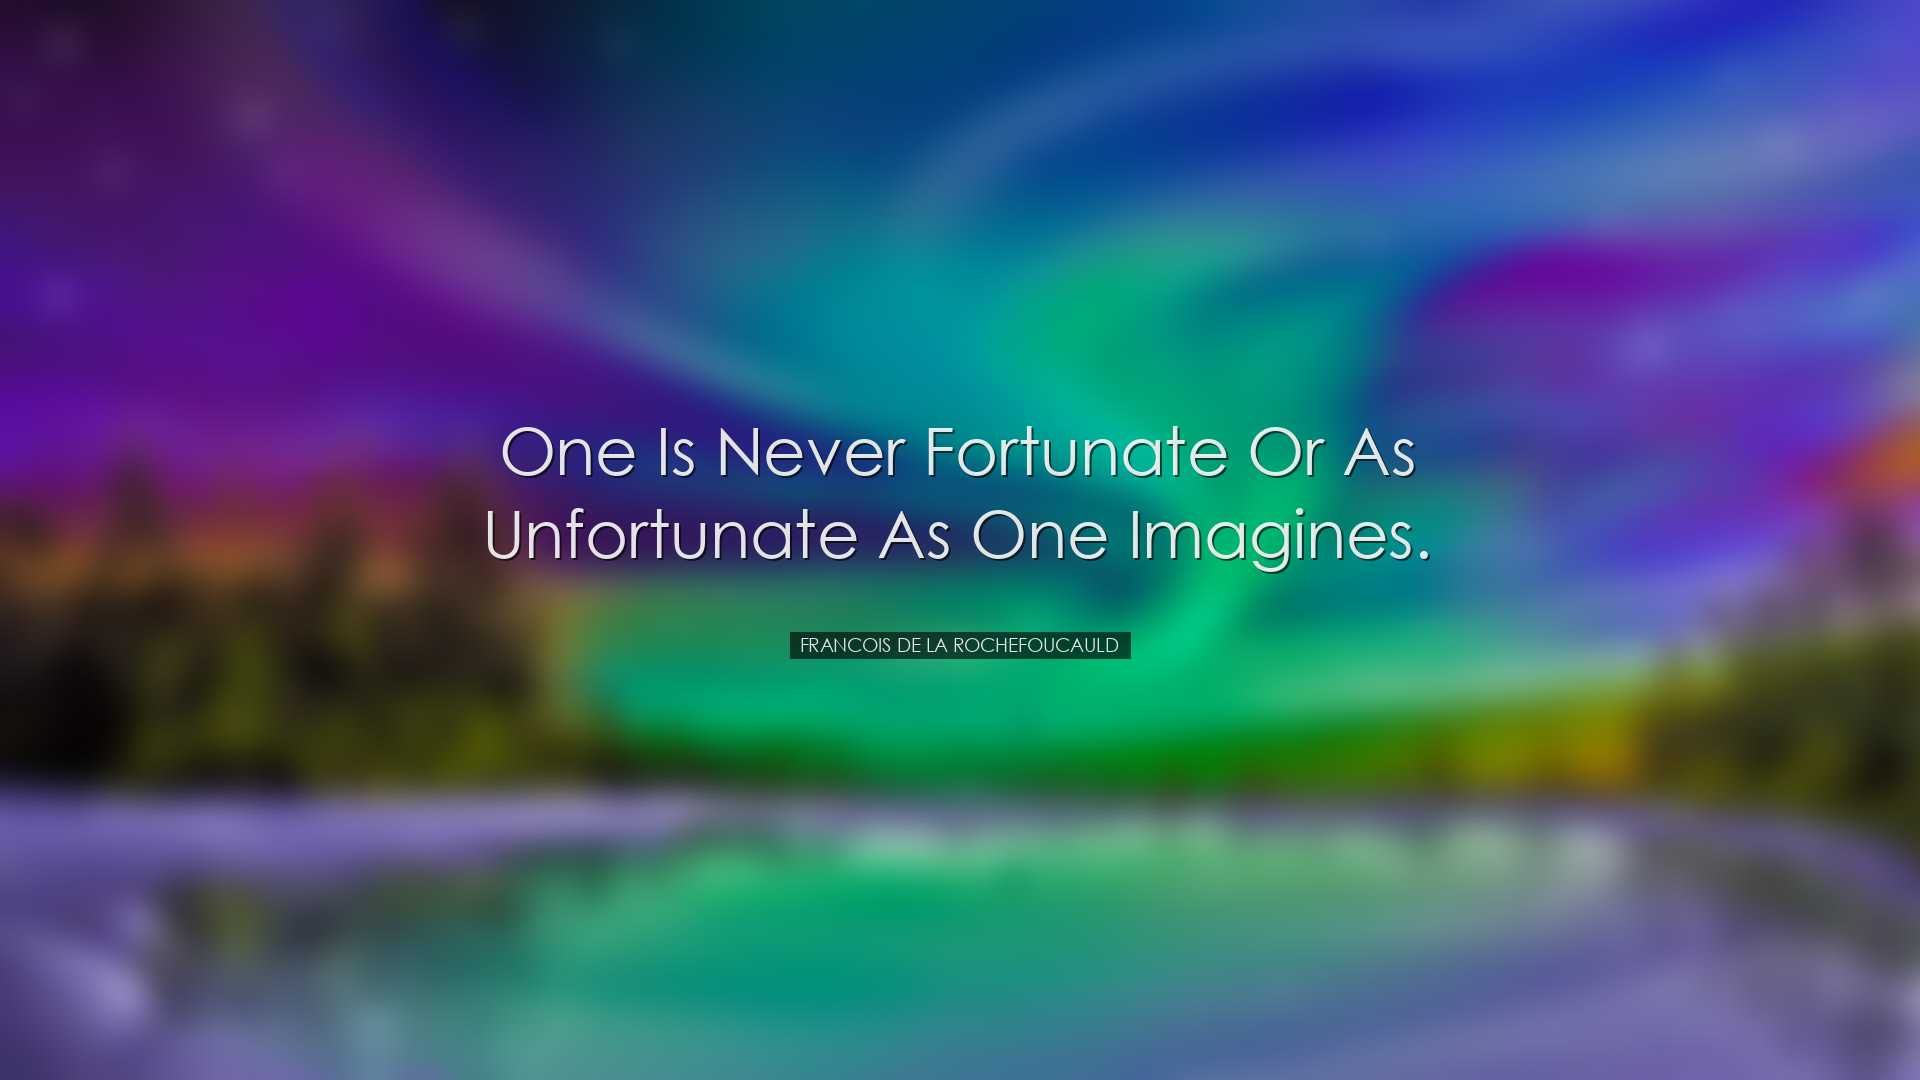 One is never fortunate or as unfortunate as one imagines. - Franco